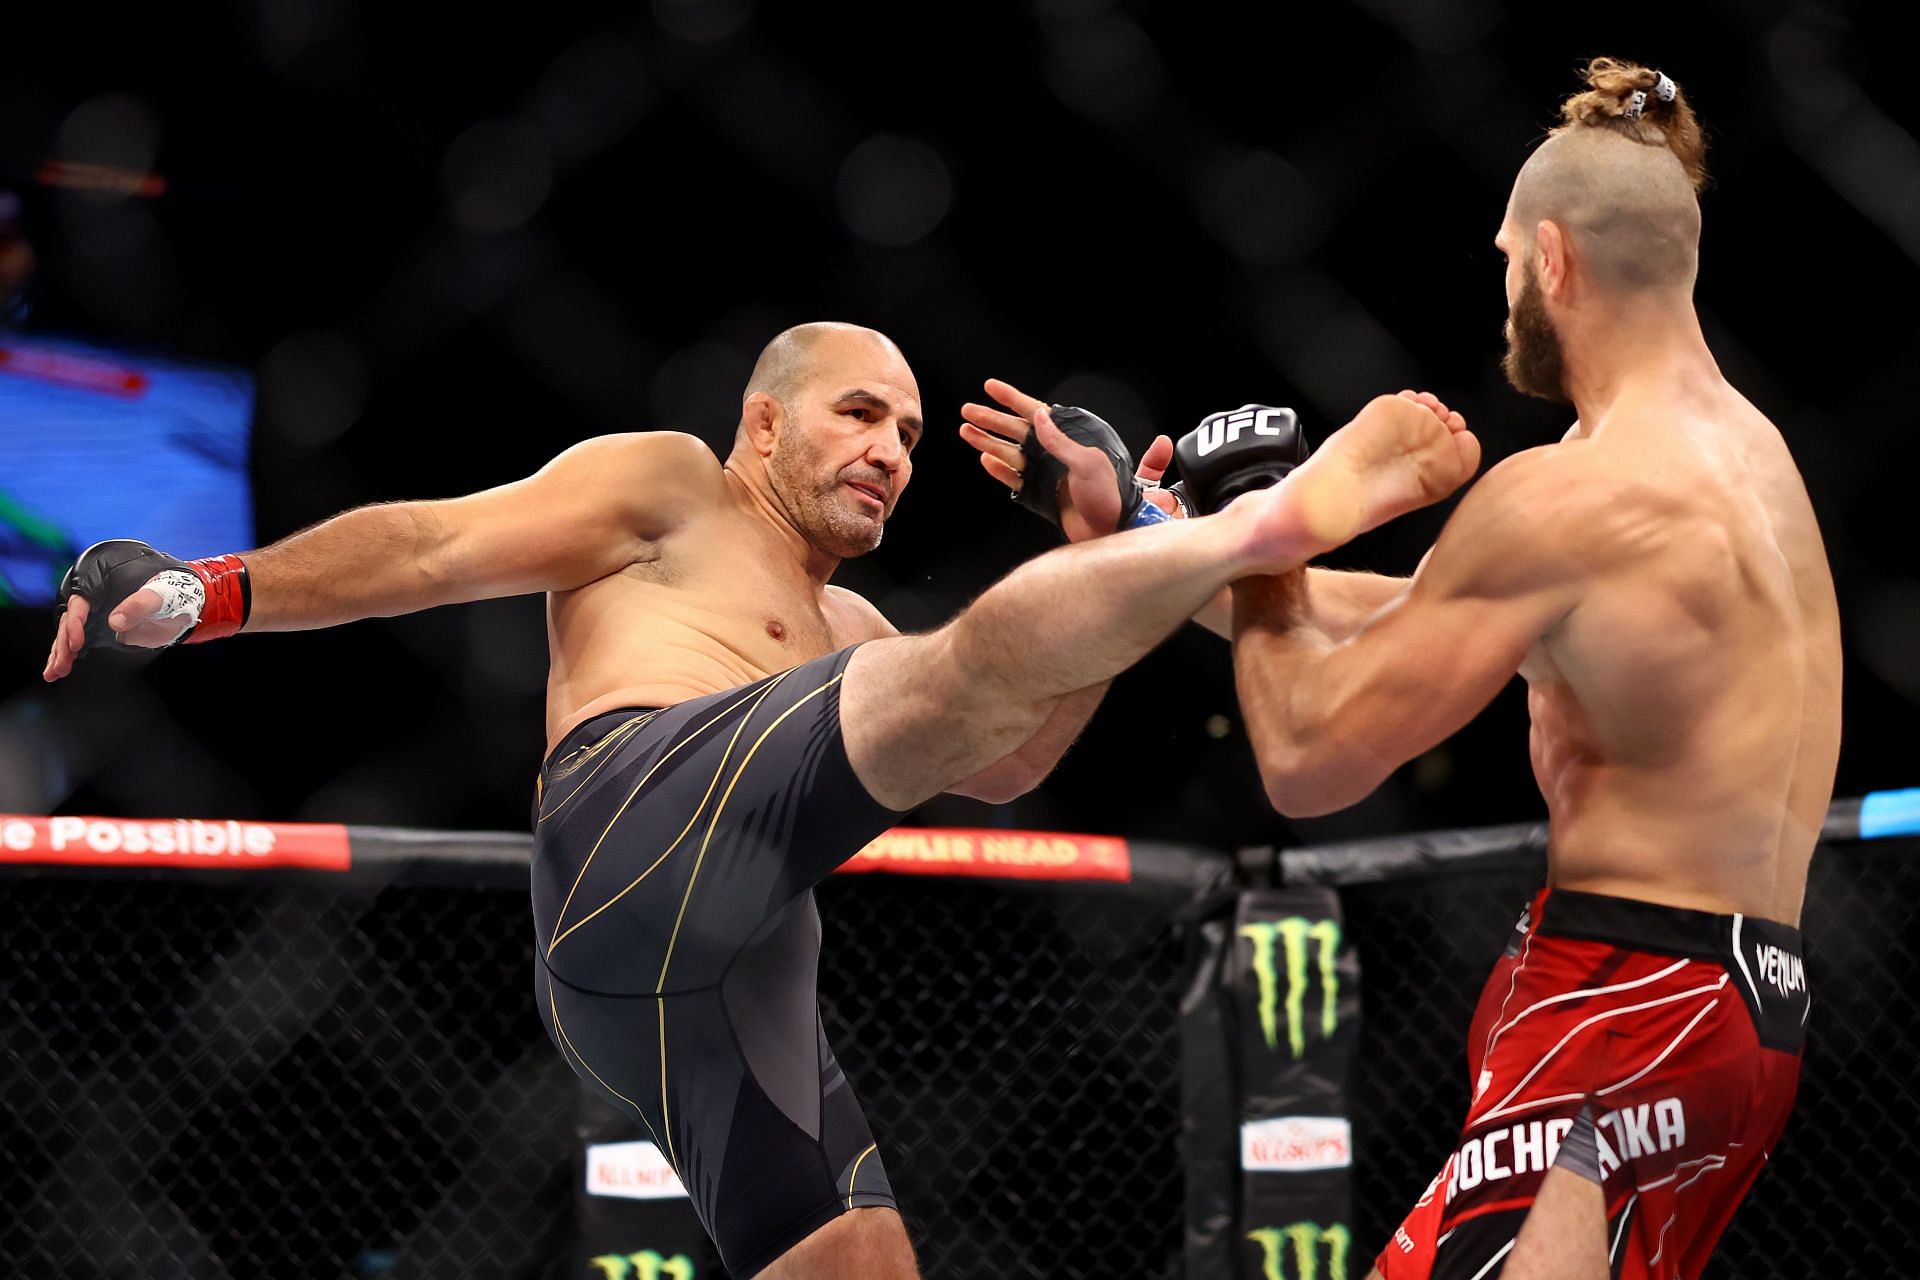 Former champion Glover Teixeira remains one of the most dangerous men in the light-heavyweight division